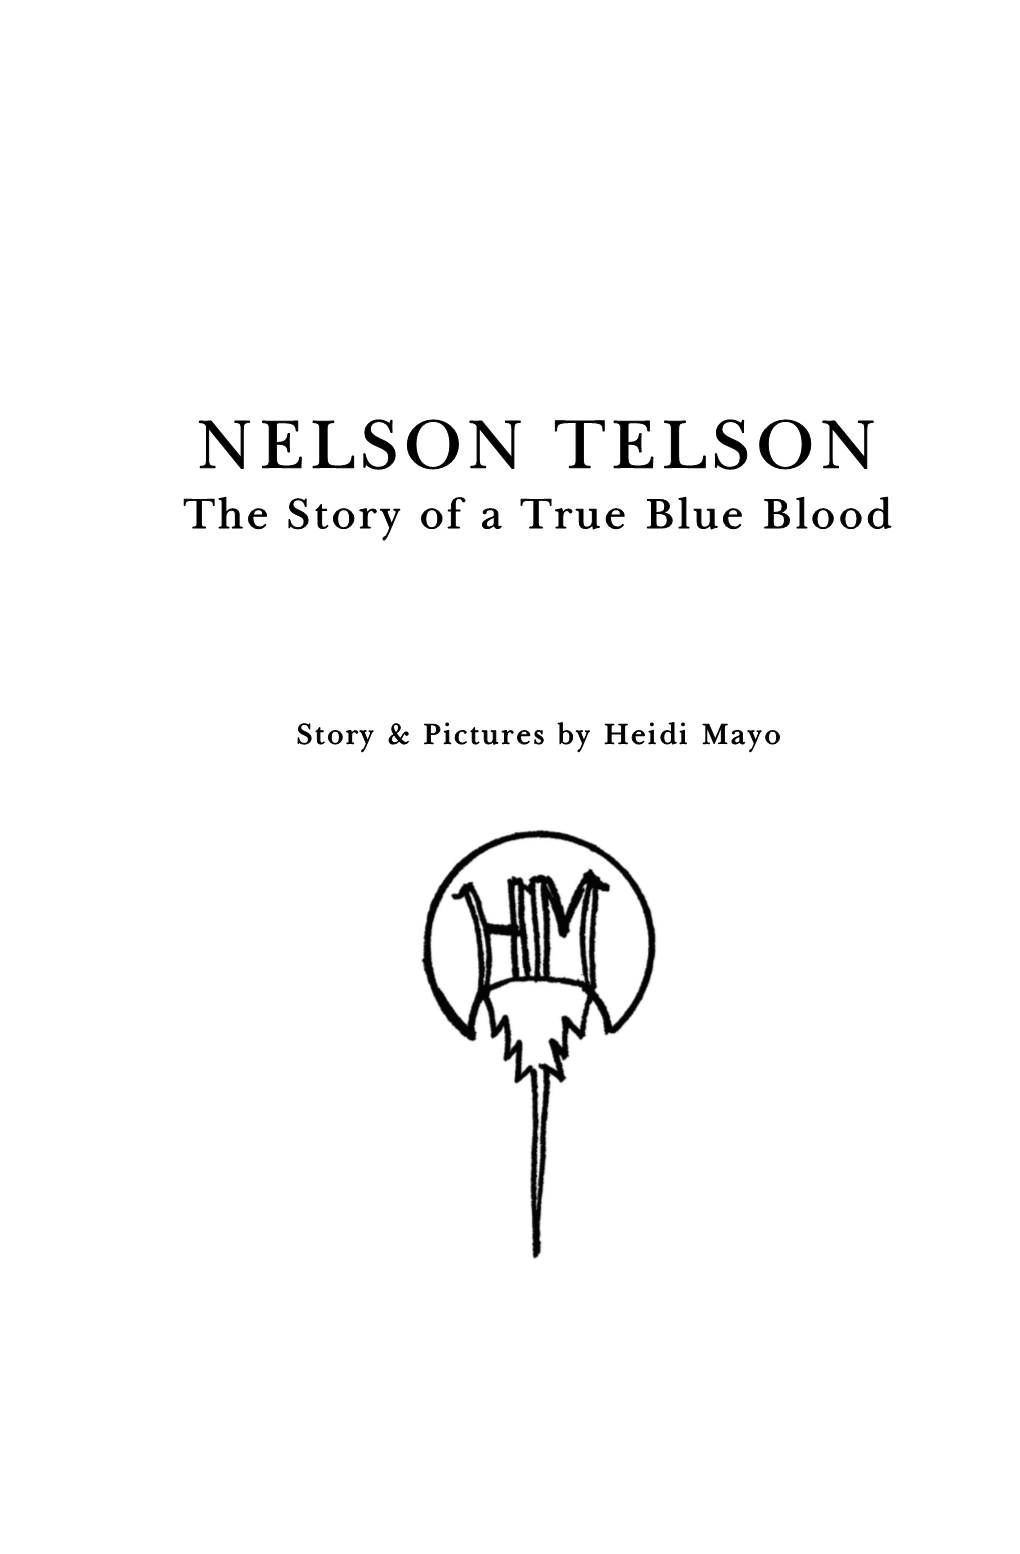 NELSON TELSON the Story of a True Blue Blood